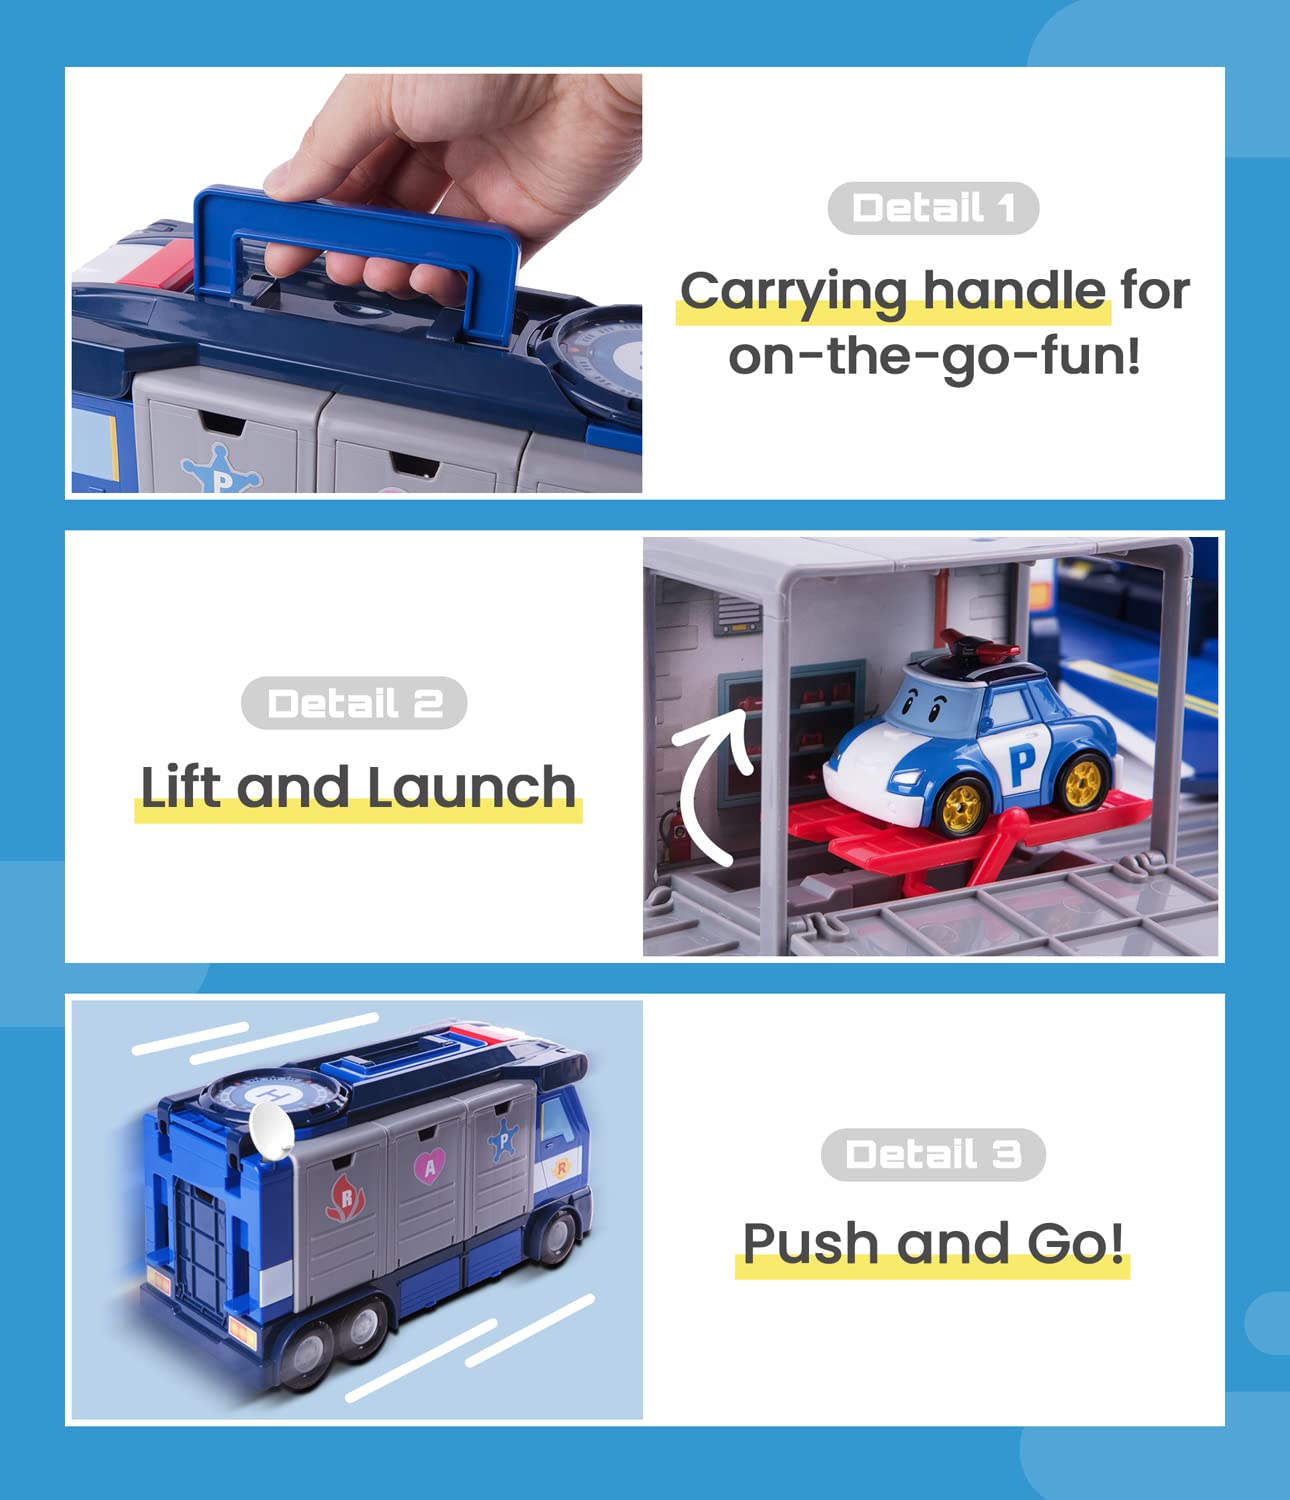 Robocar POLI Toys, Mobile Headquarters, 3-in-1 Transforming Police HQ Trailer Truck Toy with Vehicle Launchers & 1 Poli Die-Cast Car, Kids Toys for Ages 3 and up